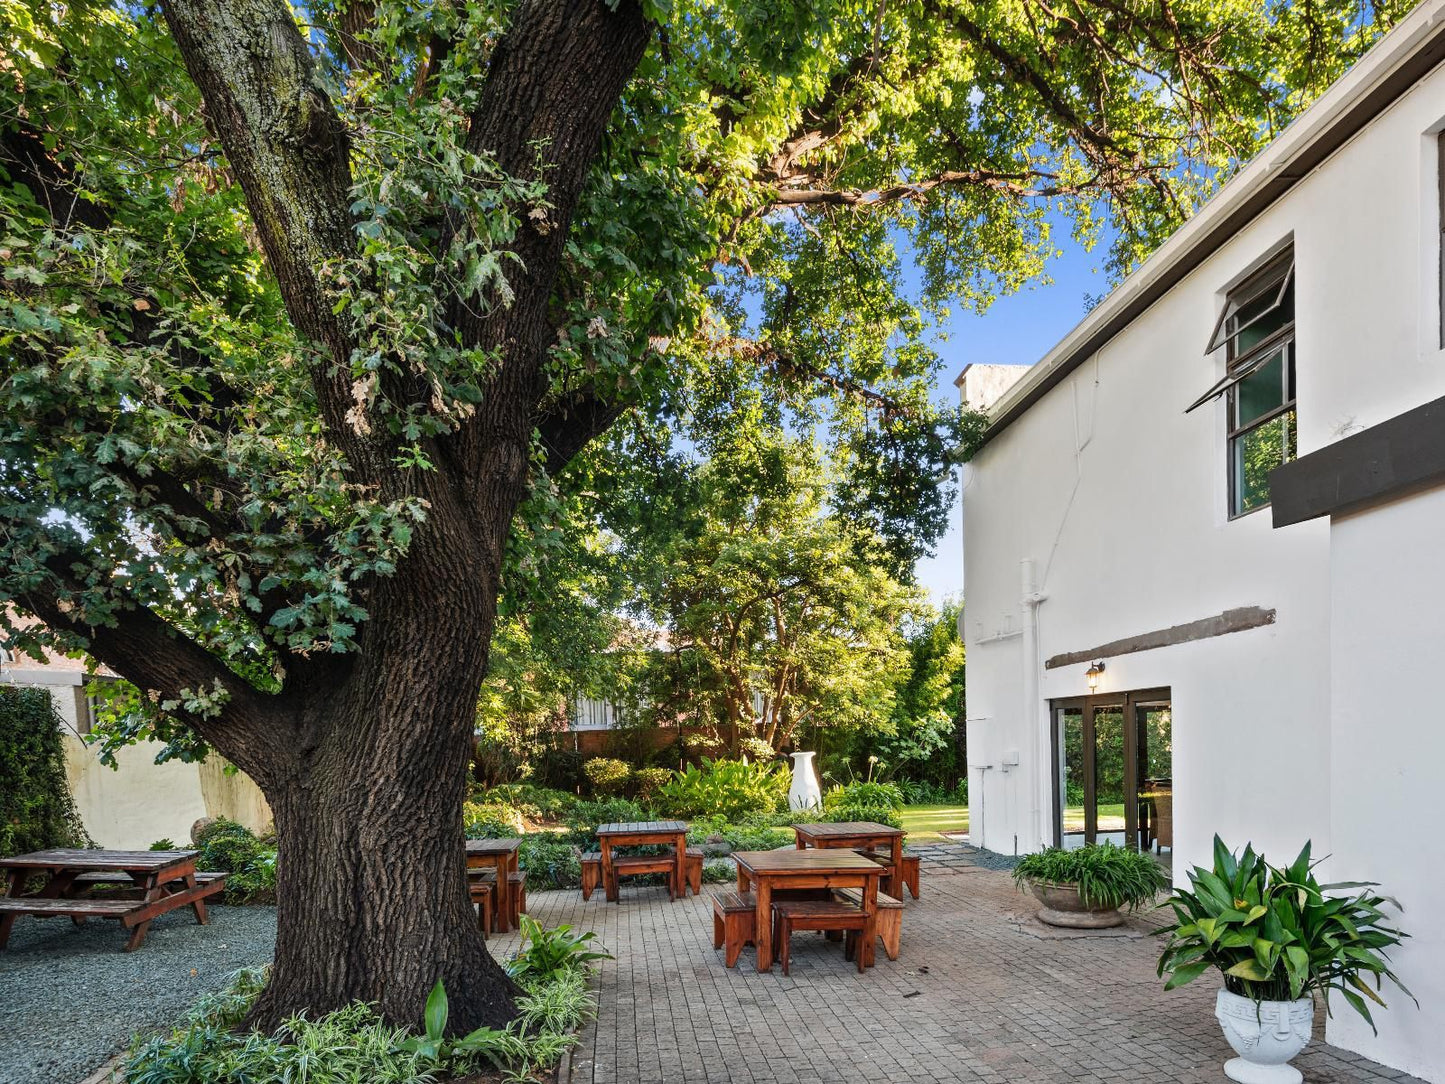 De Akker Guest House Park West Bloemfontein Free State South Africa House, Building, Architecture